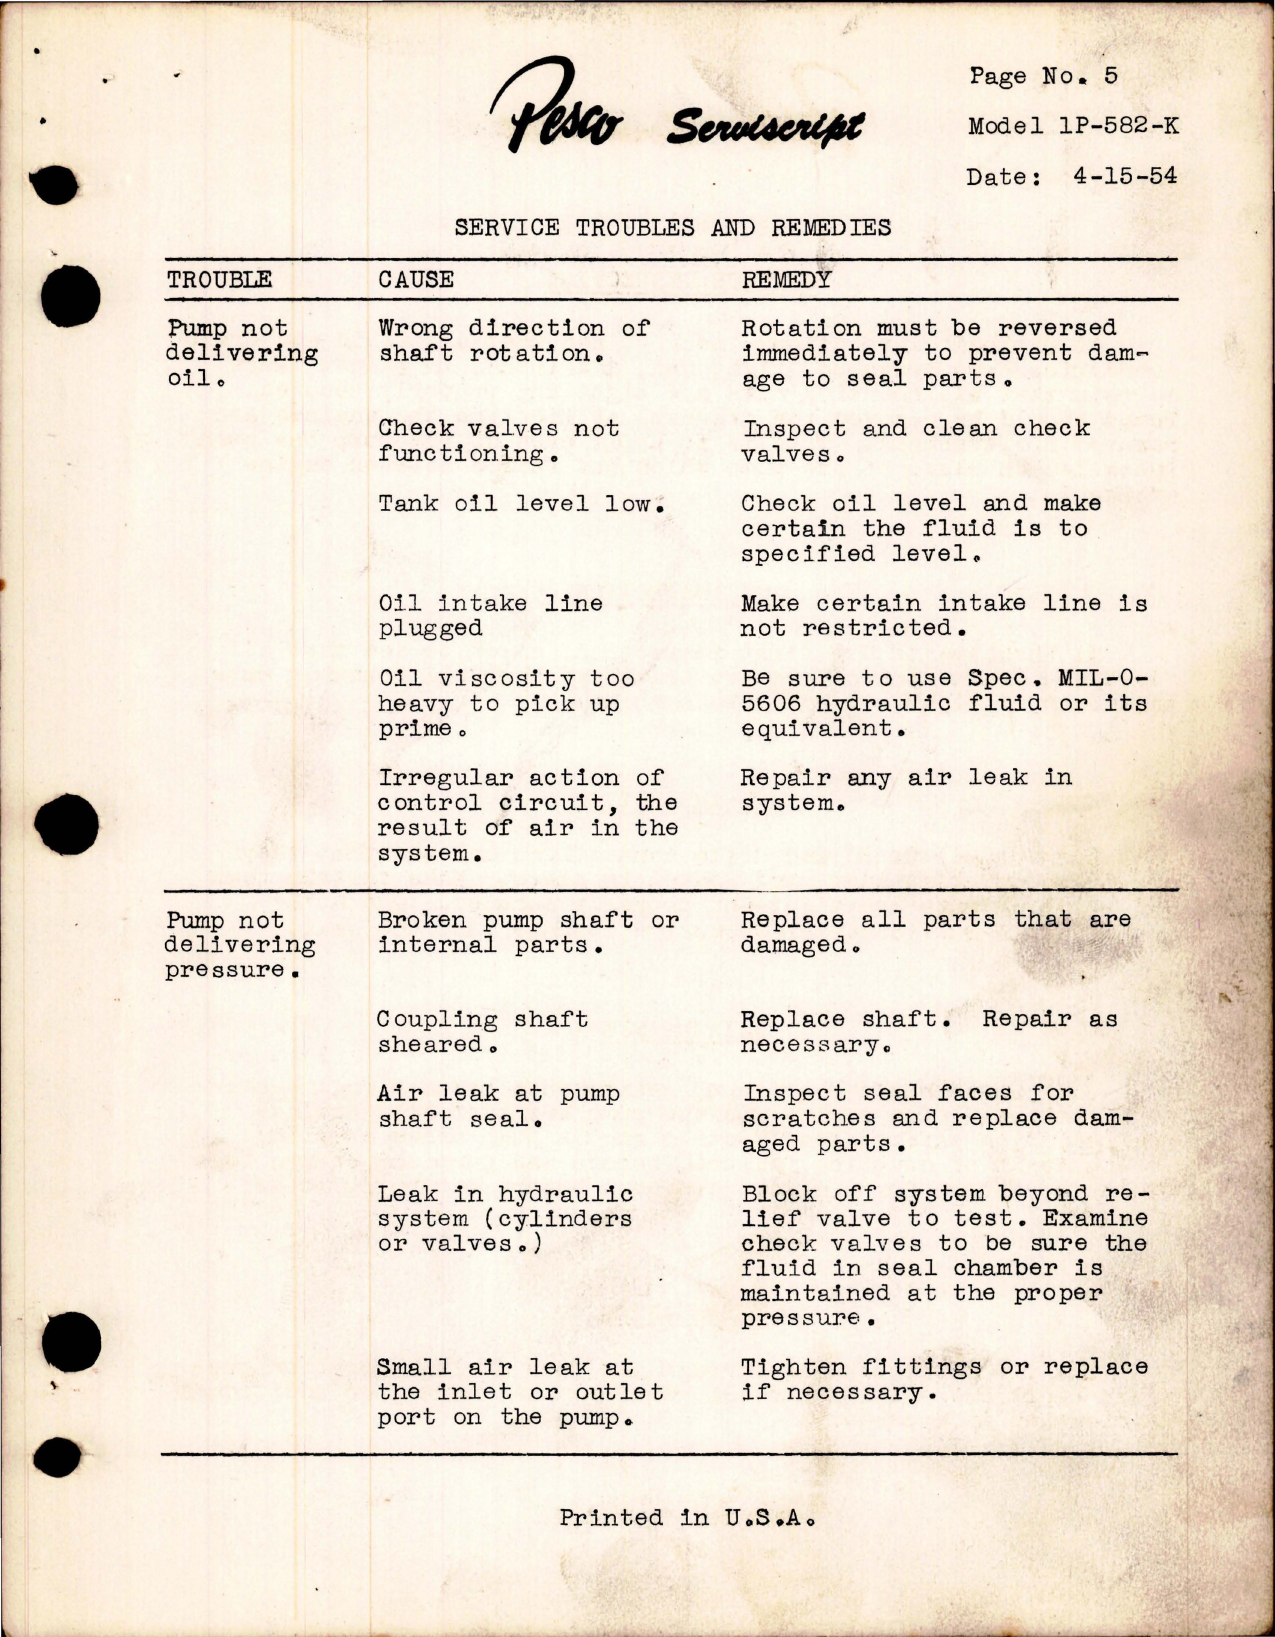 Sample page 5 from AirCorps Library document: Maintenance and Overhaul Instructions w Parts List for Hydraulic Gear Pump - Model 1P-582-K